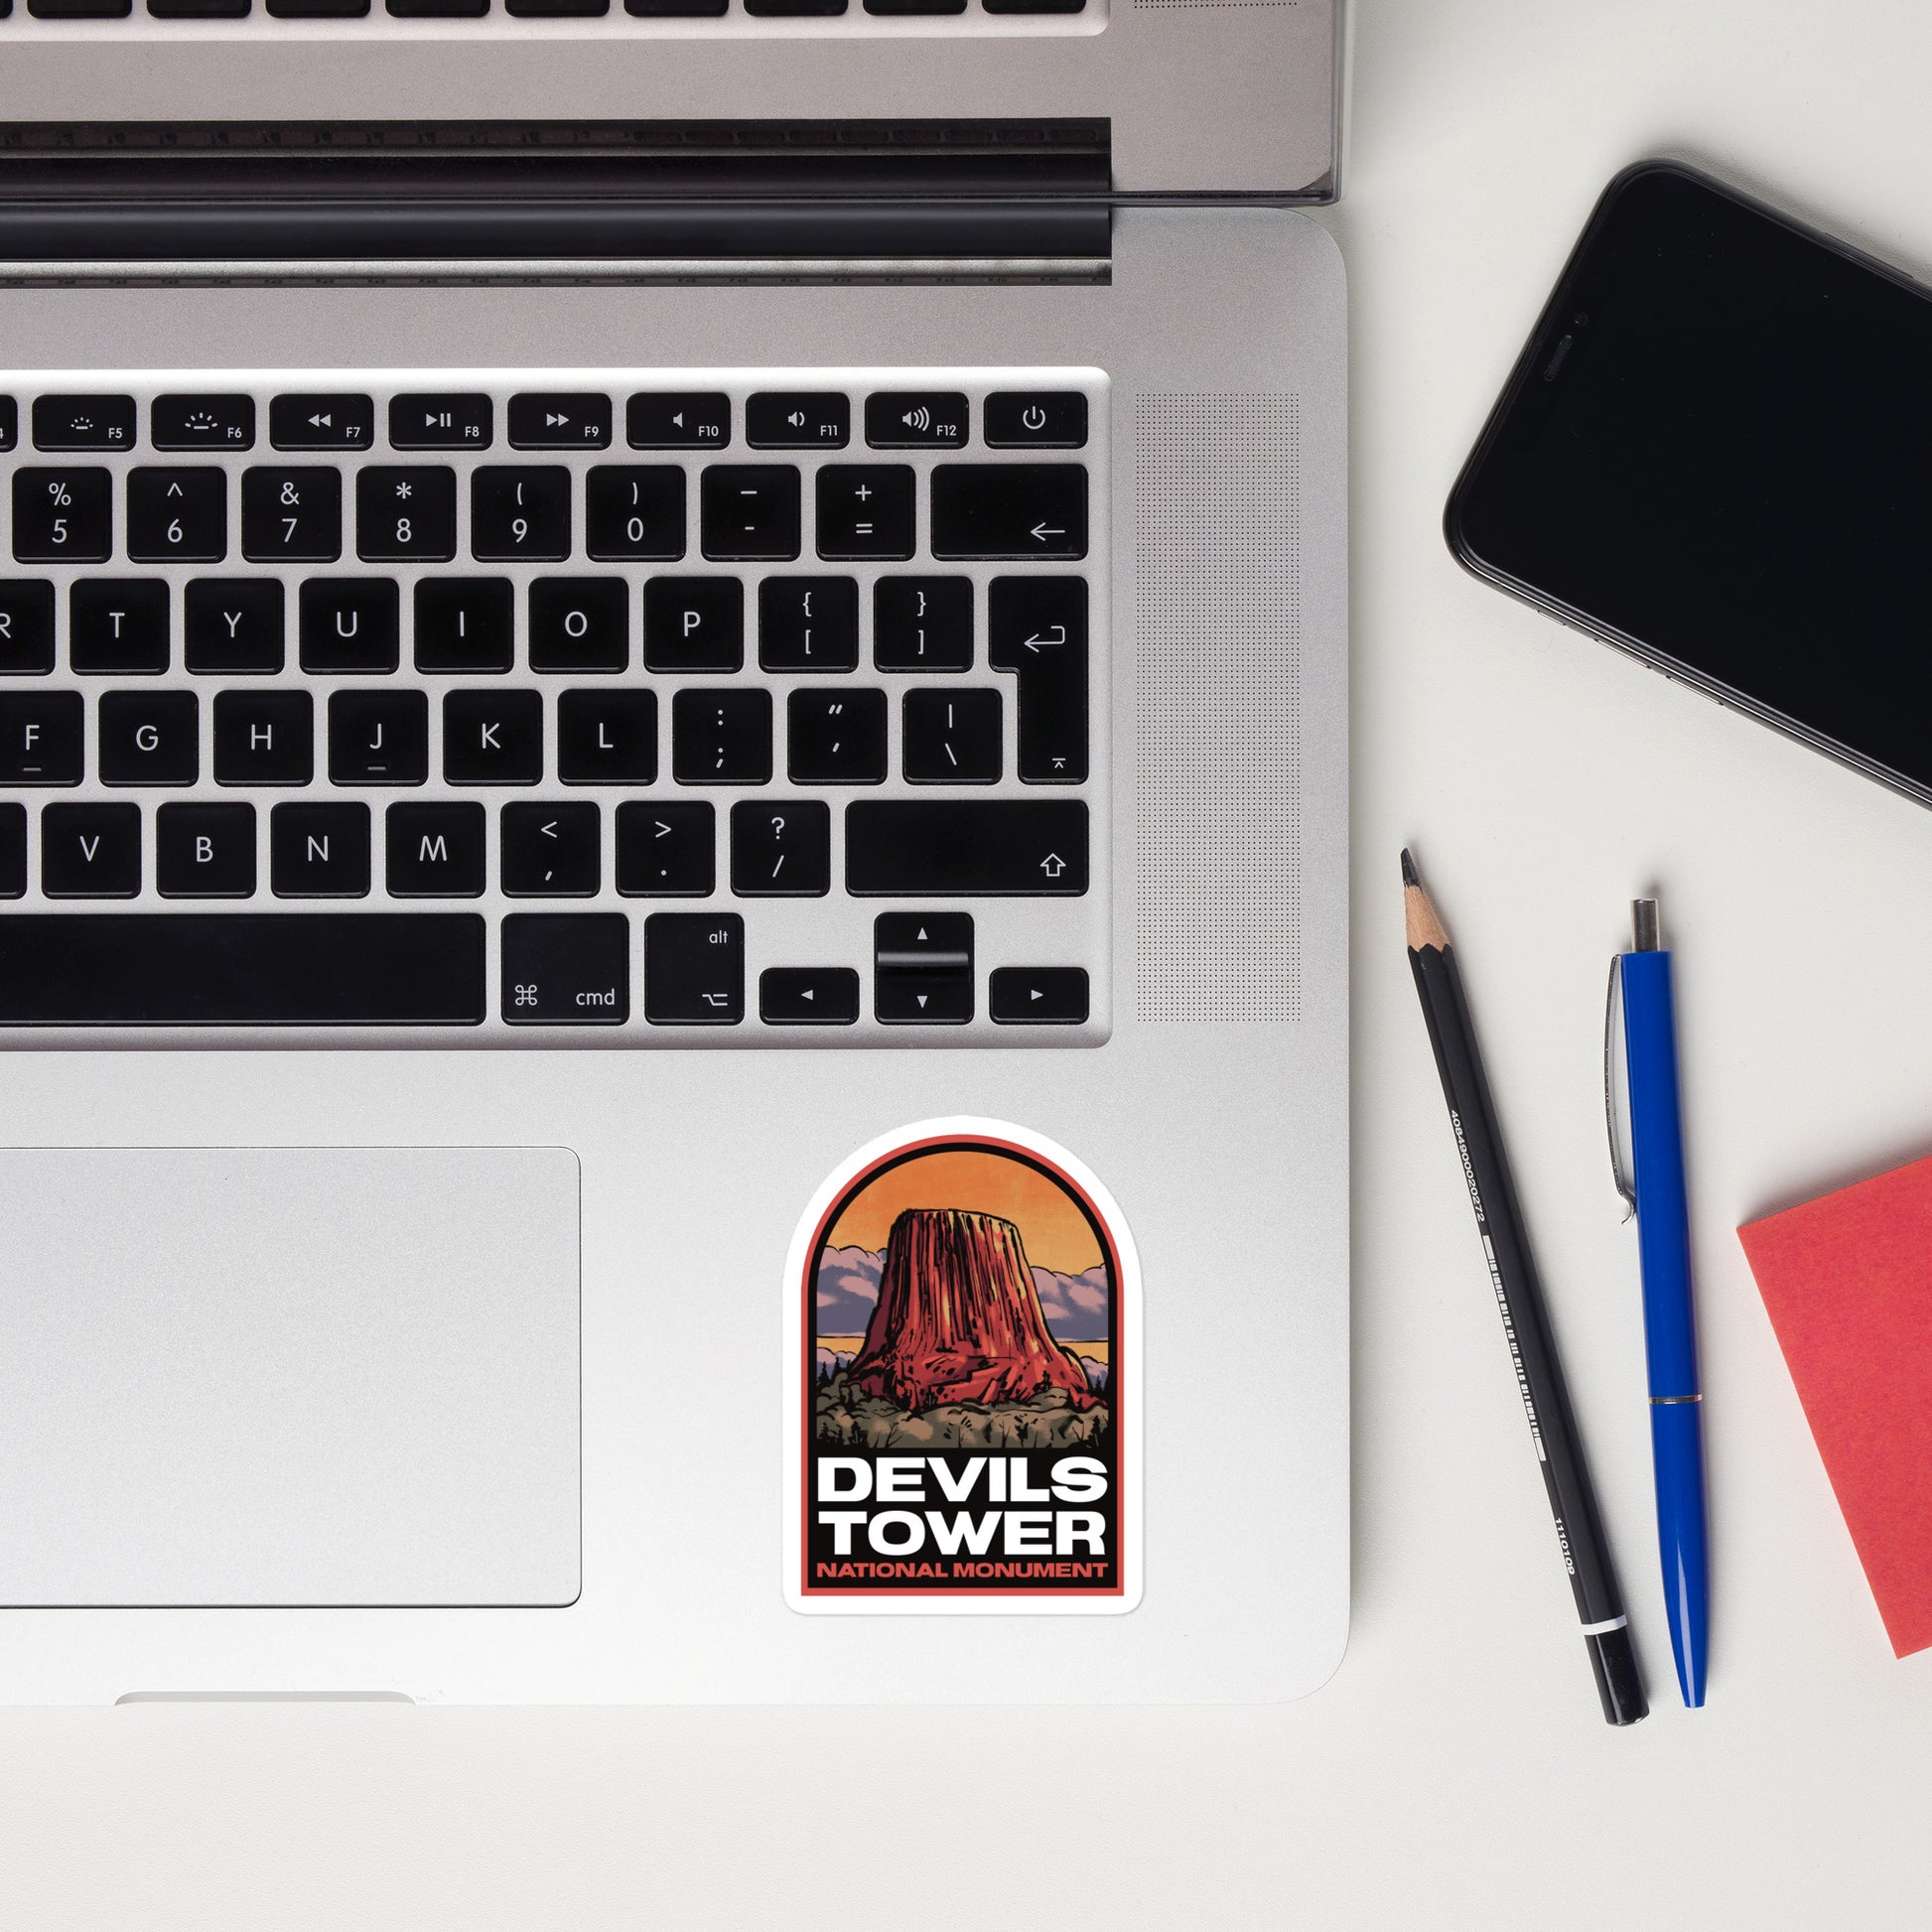 A sticker of Devils Tower National Monument on a laptop